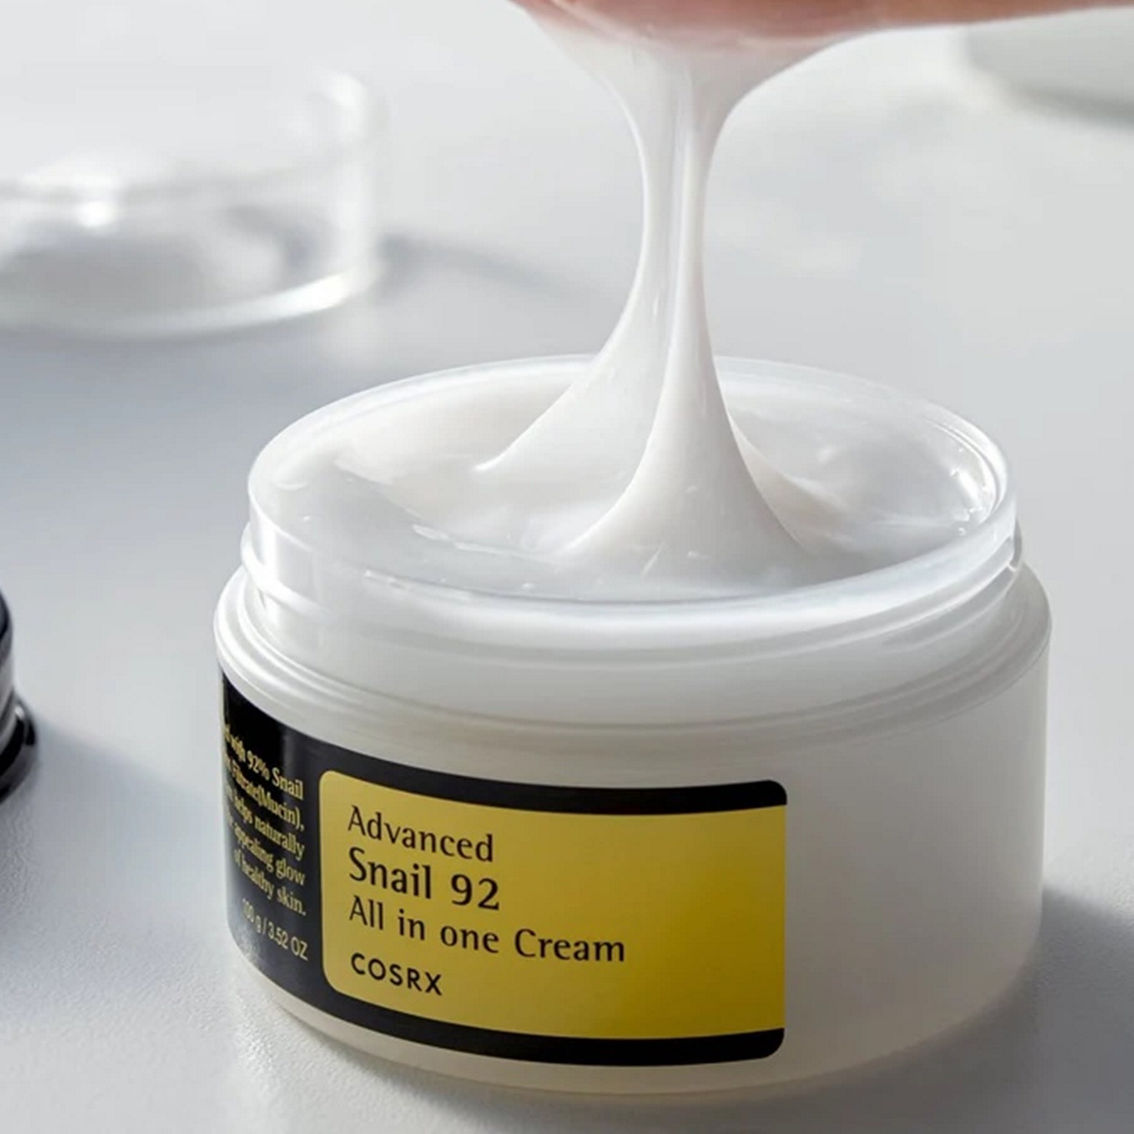 COSRX Advanced Snail 92 All in One Cream 100 g - Image 4 of 5